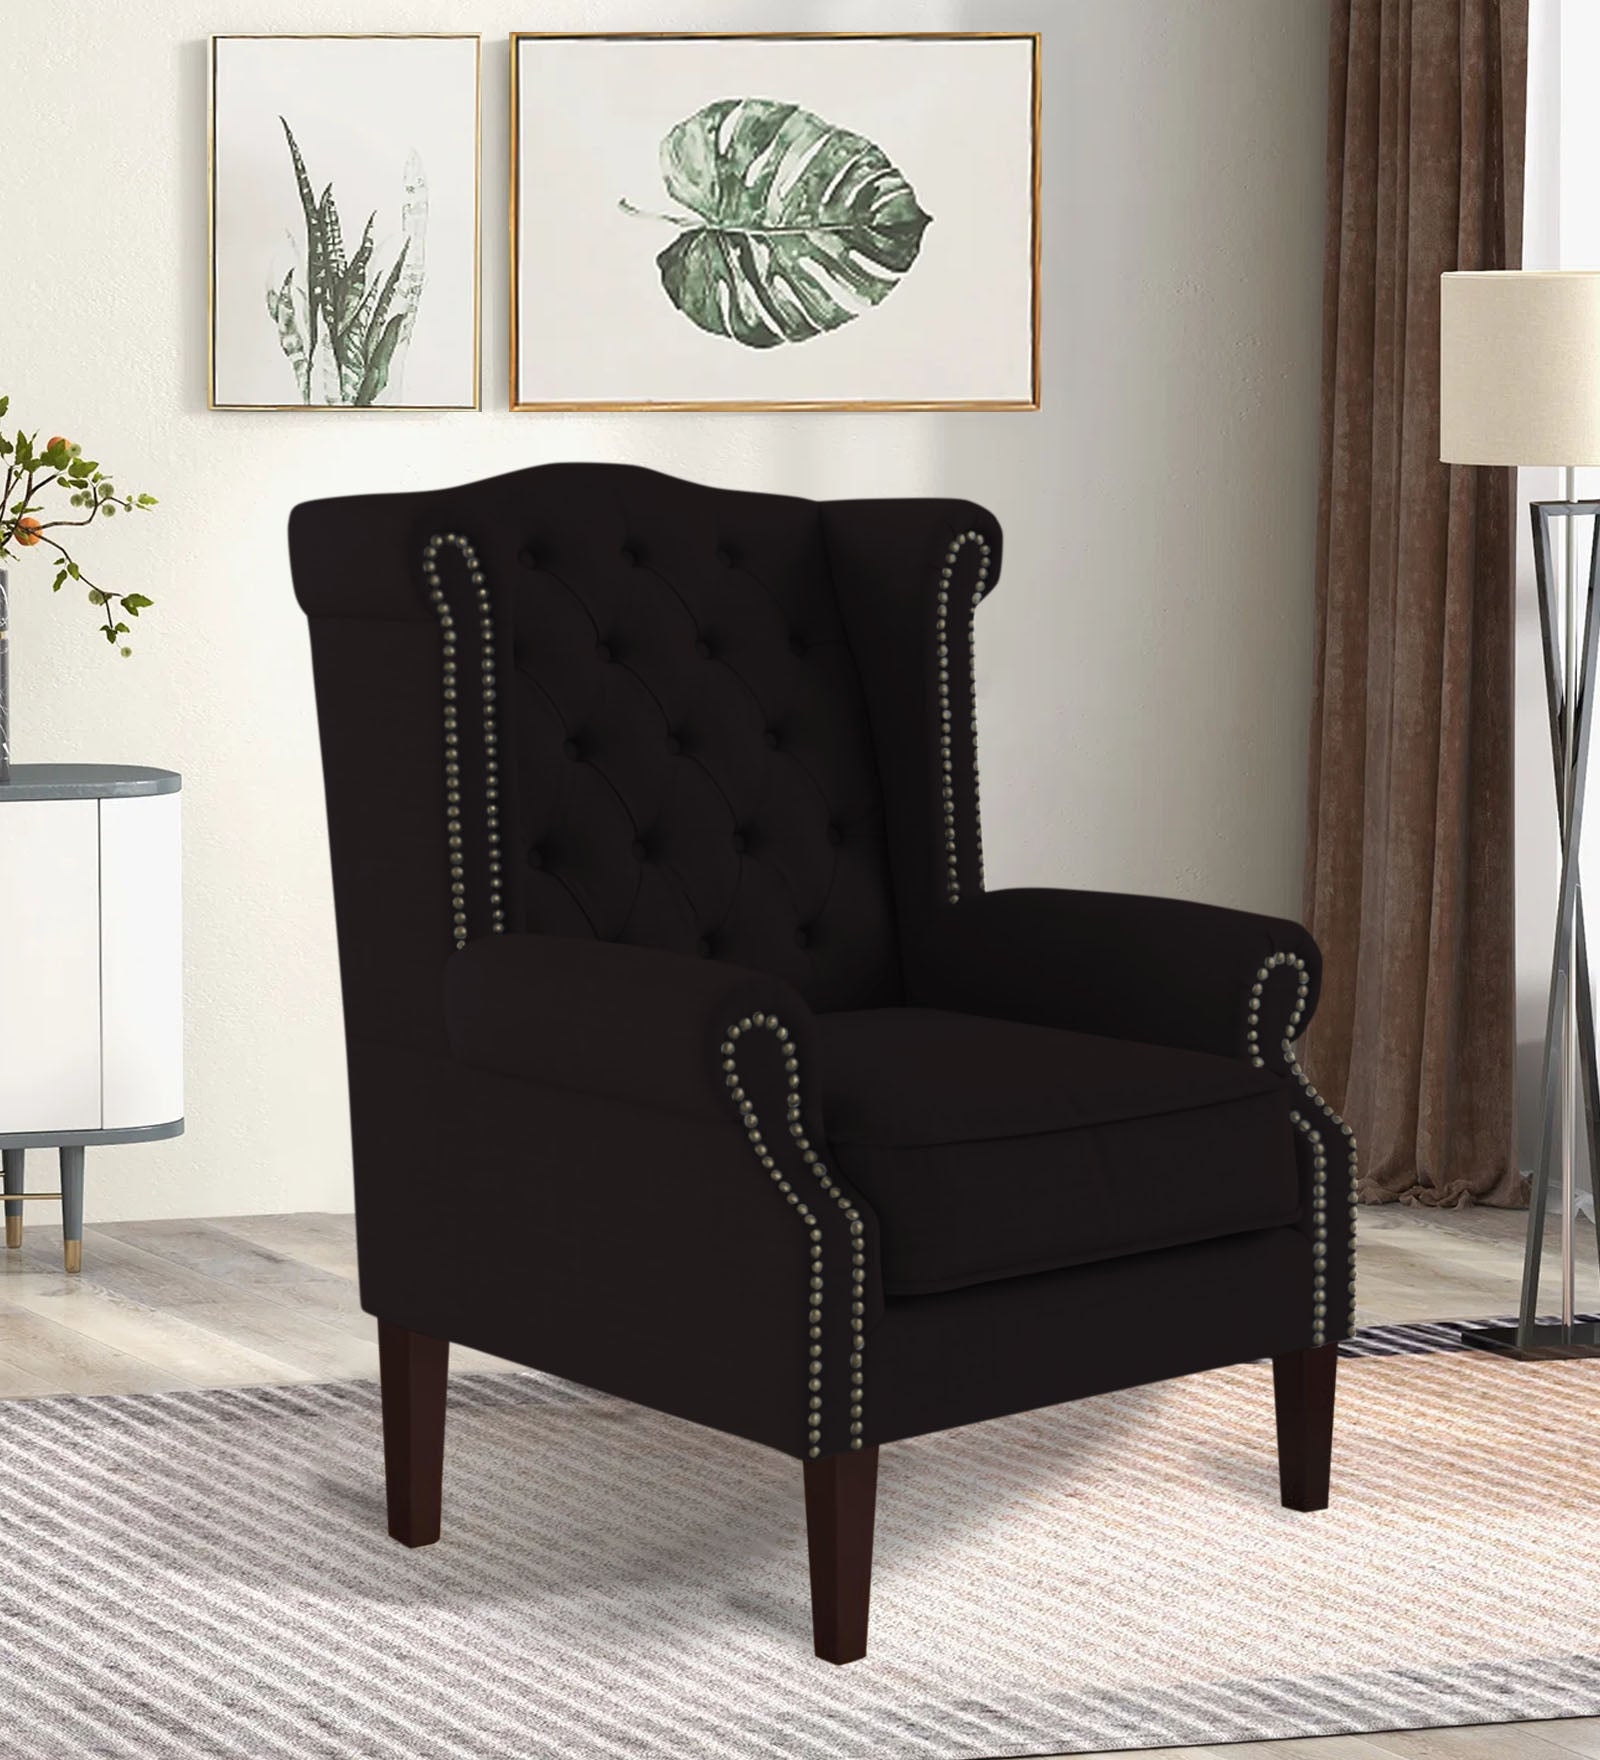 Nottage Fabric Wing Chair in Cara Brown Colour